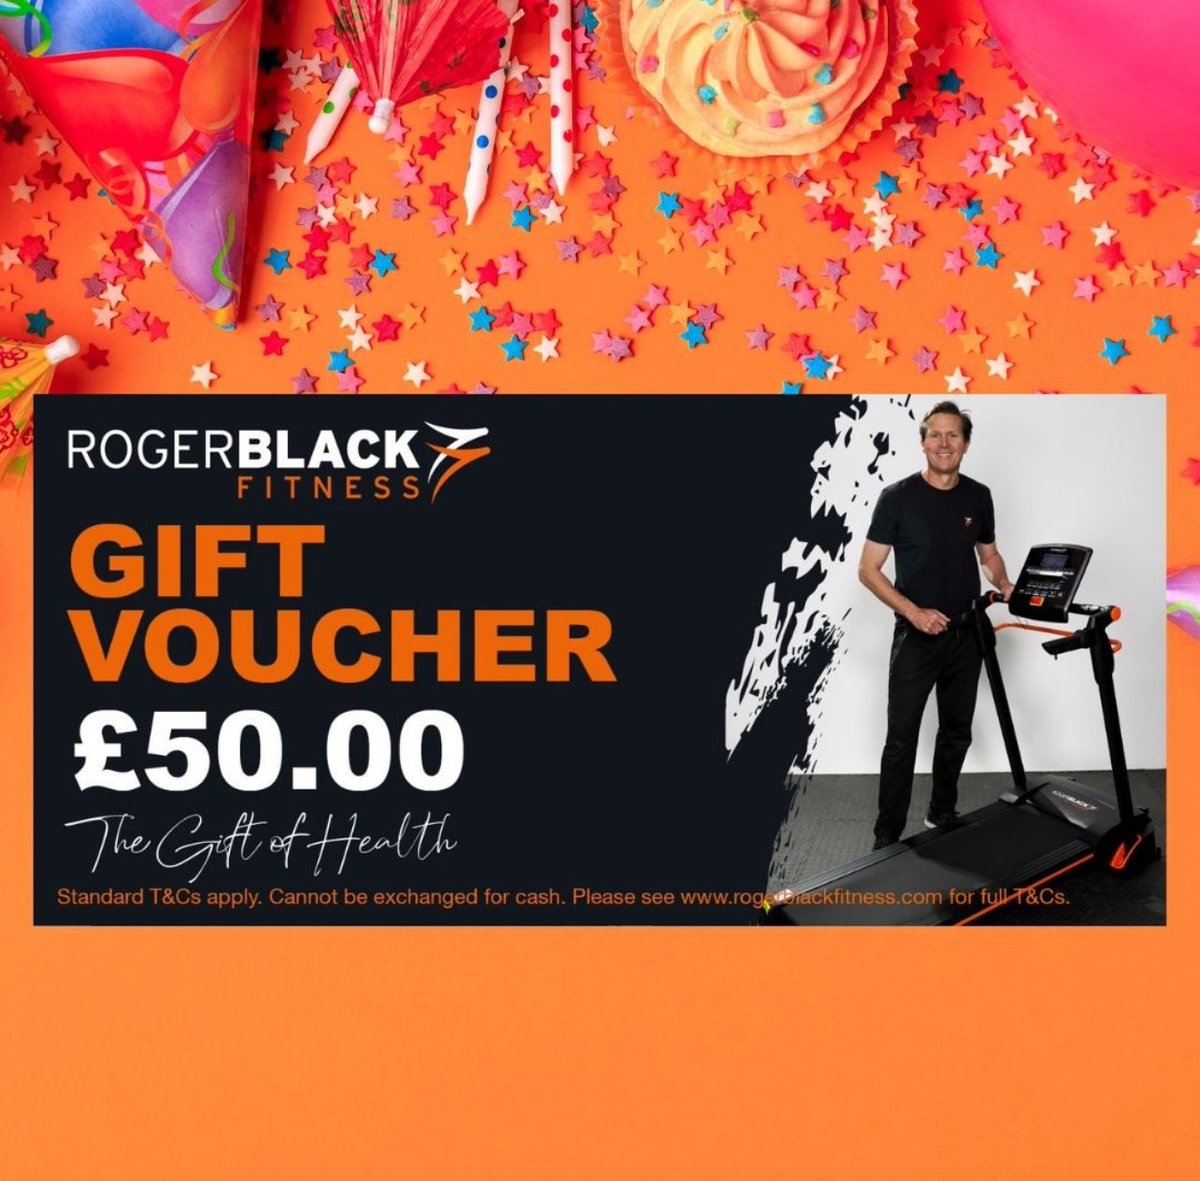 Running out of time? (Geddit?!) . Here’s your solution rogerblackfitness.com/product/vouche… #rogerblack #rogerblackfitness #fitnessequipment #treadmill #exercisebike #workoutfromhome #homeworkout #homegym #fitnessjourney #fitnessforall